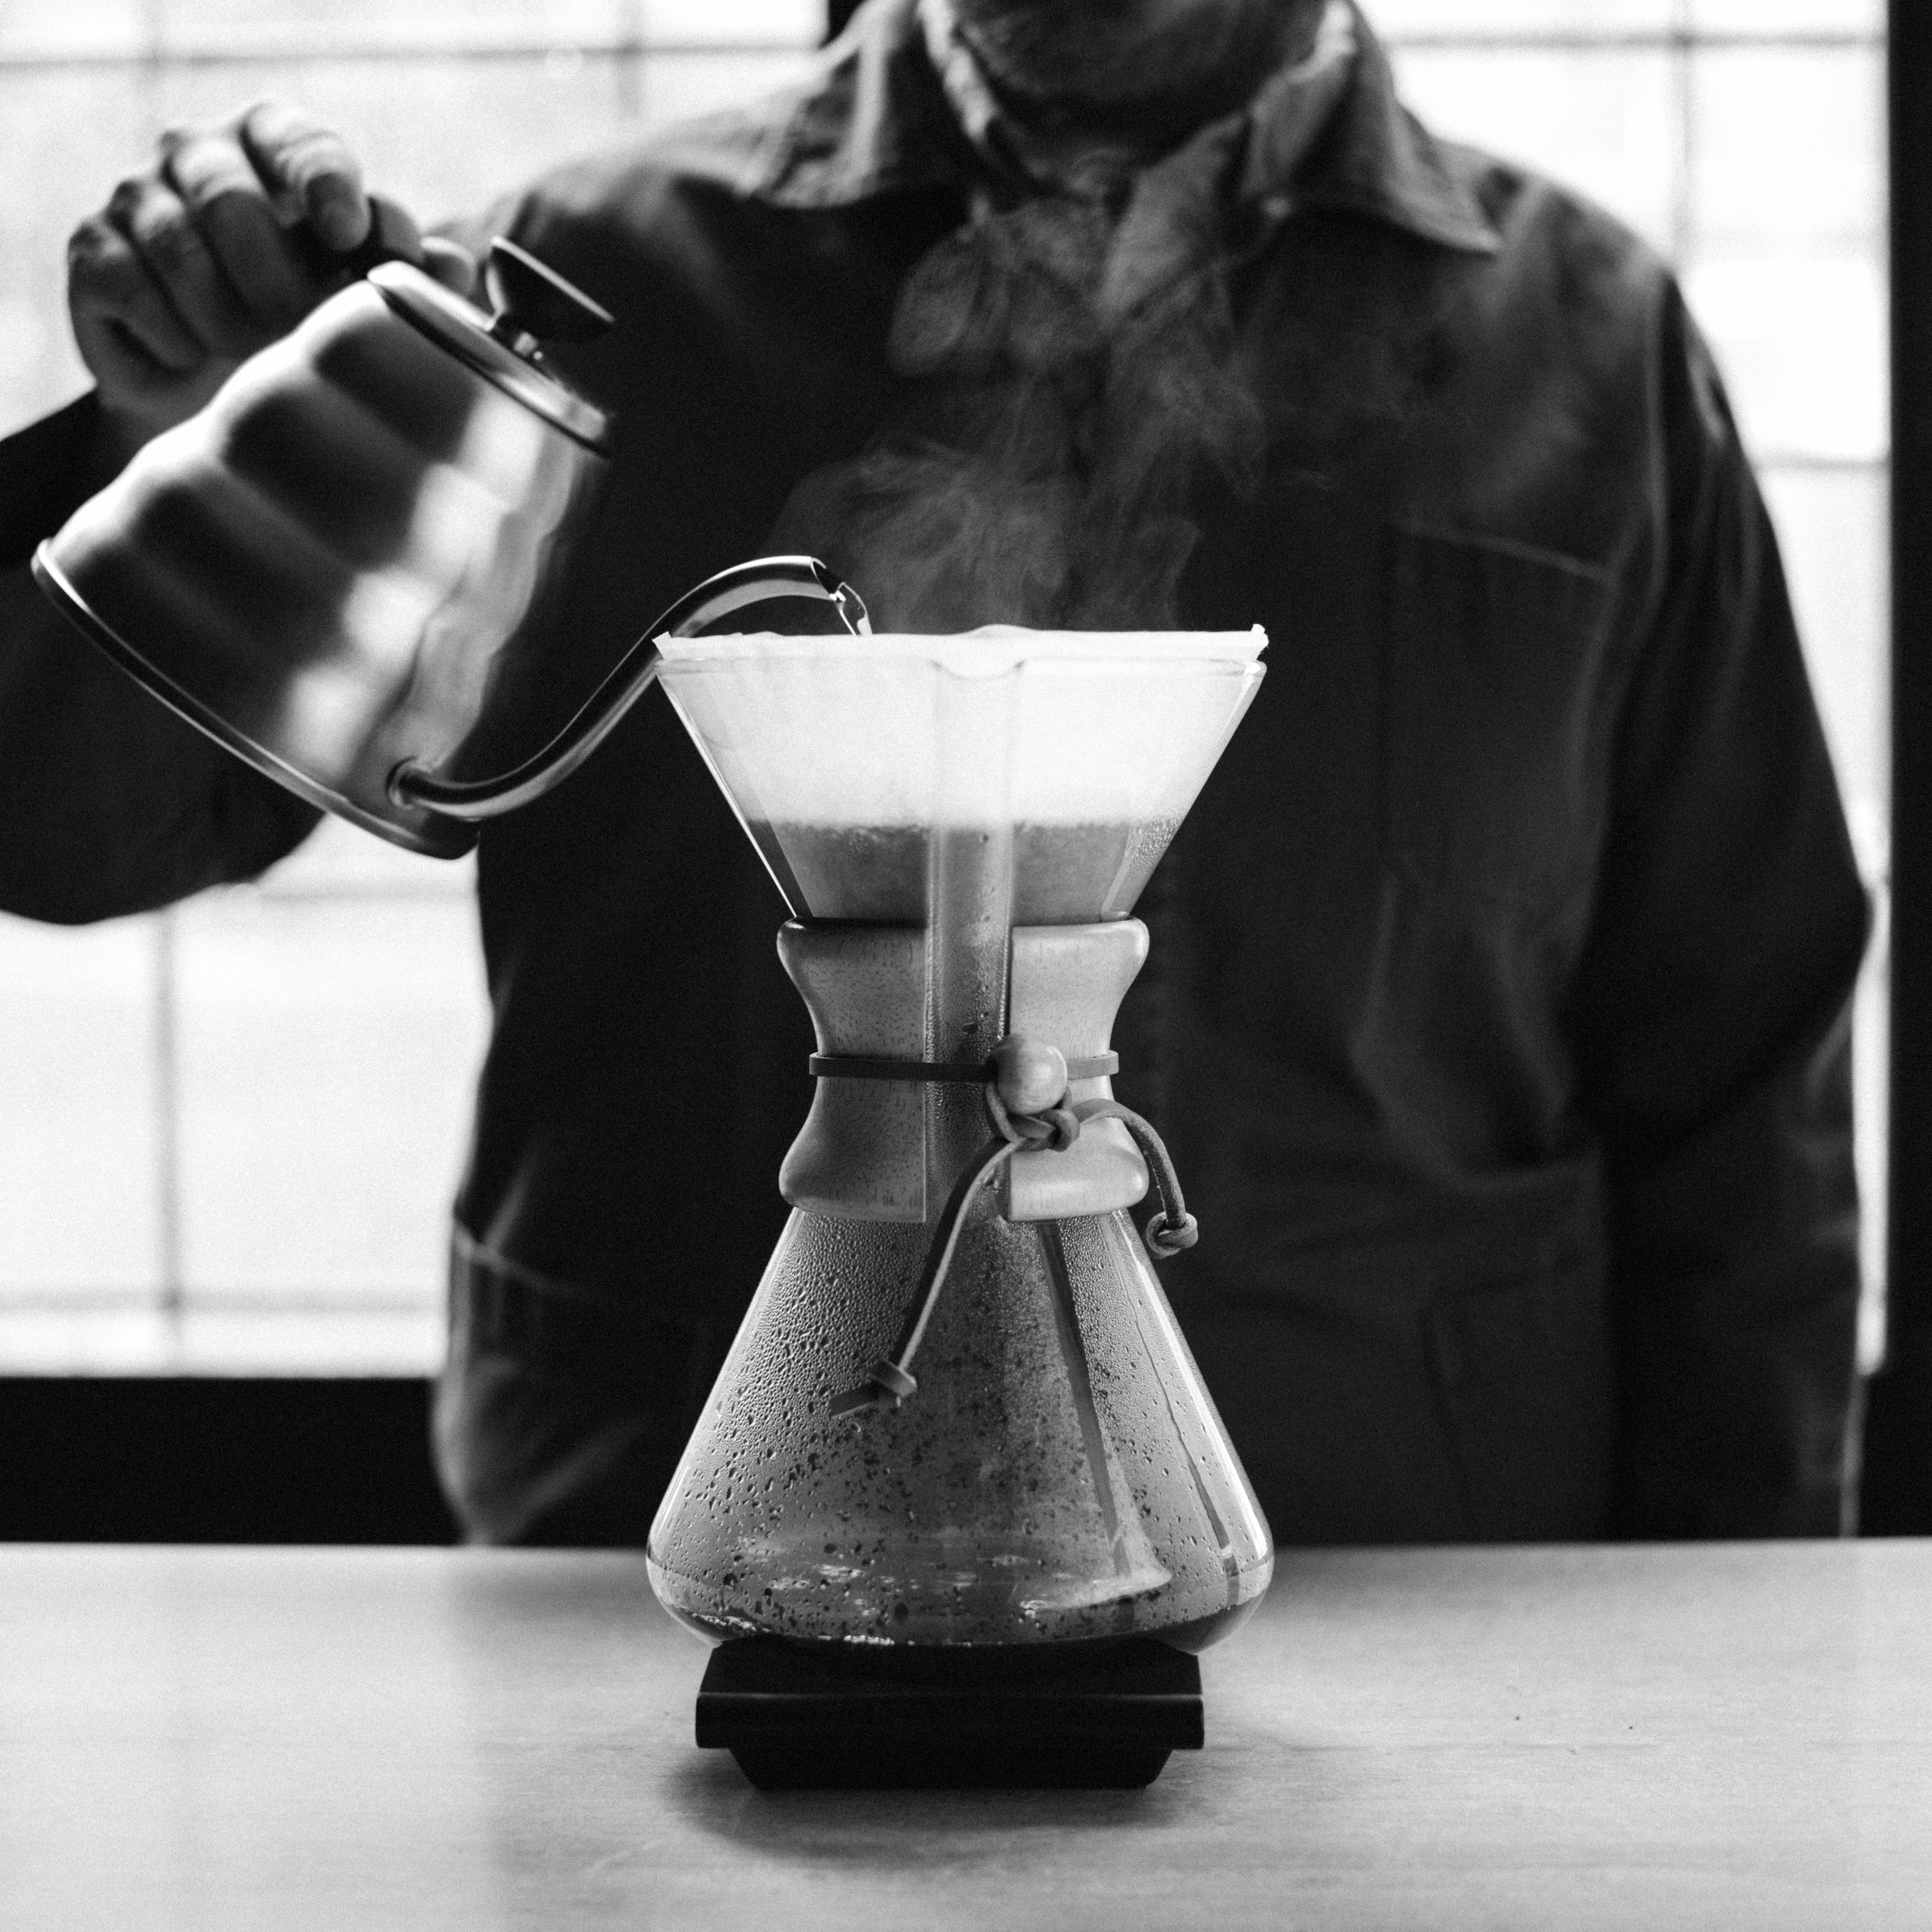 Making a coffee with a Chemex